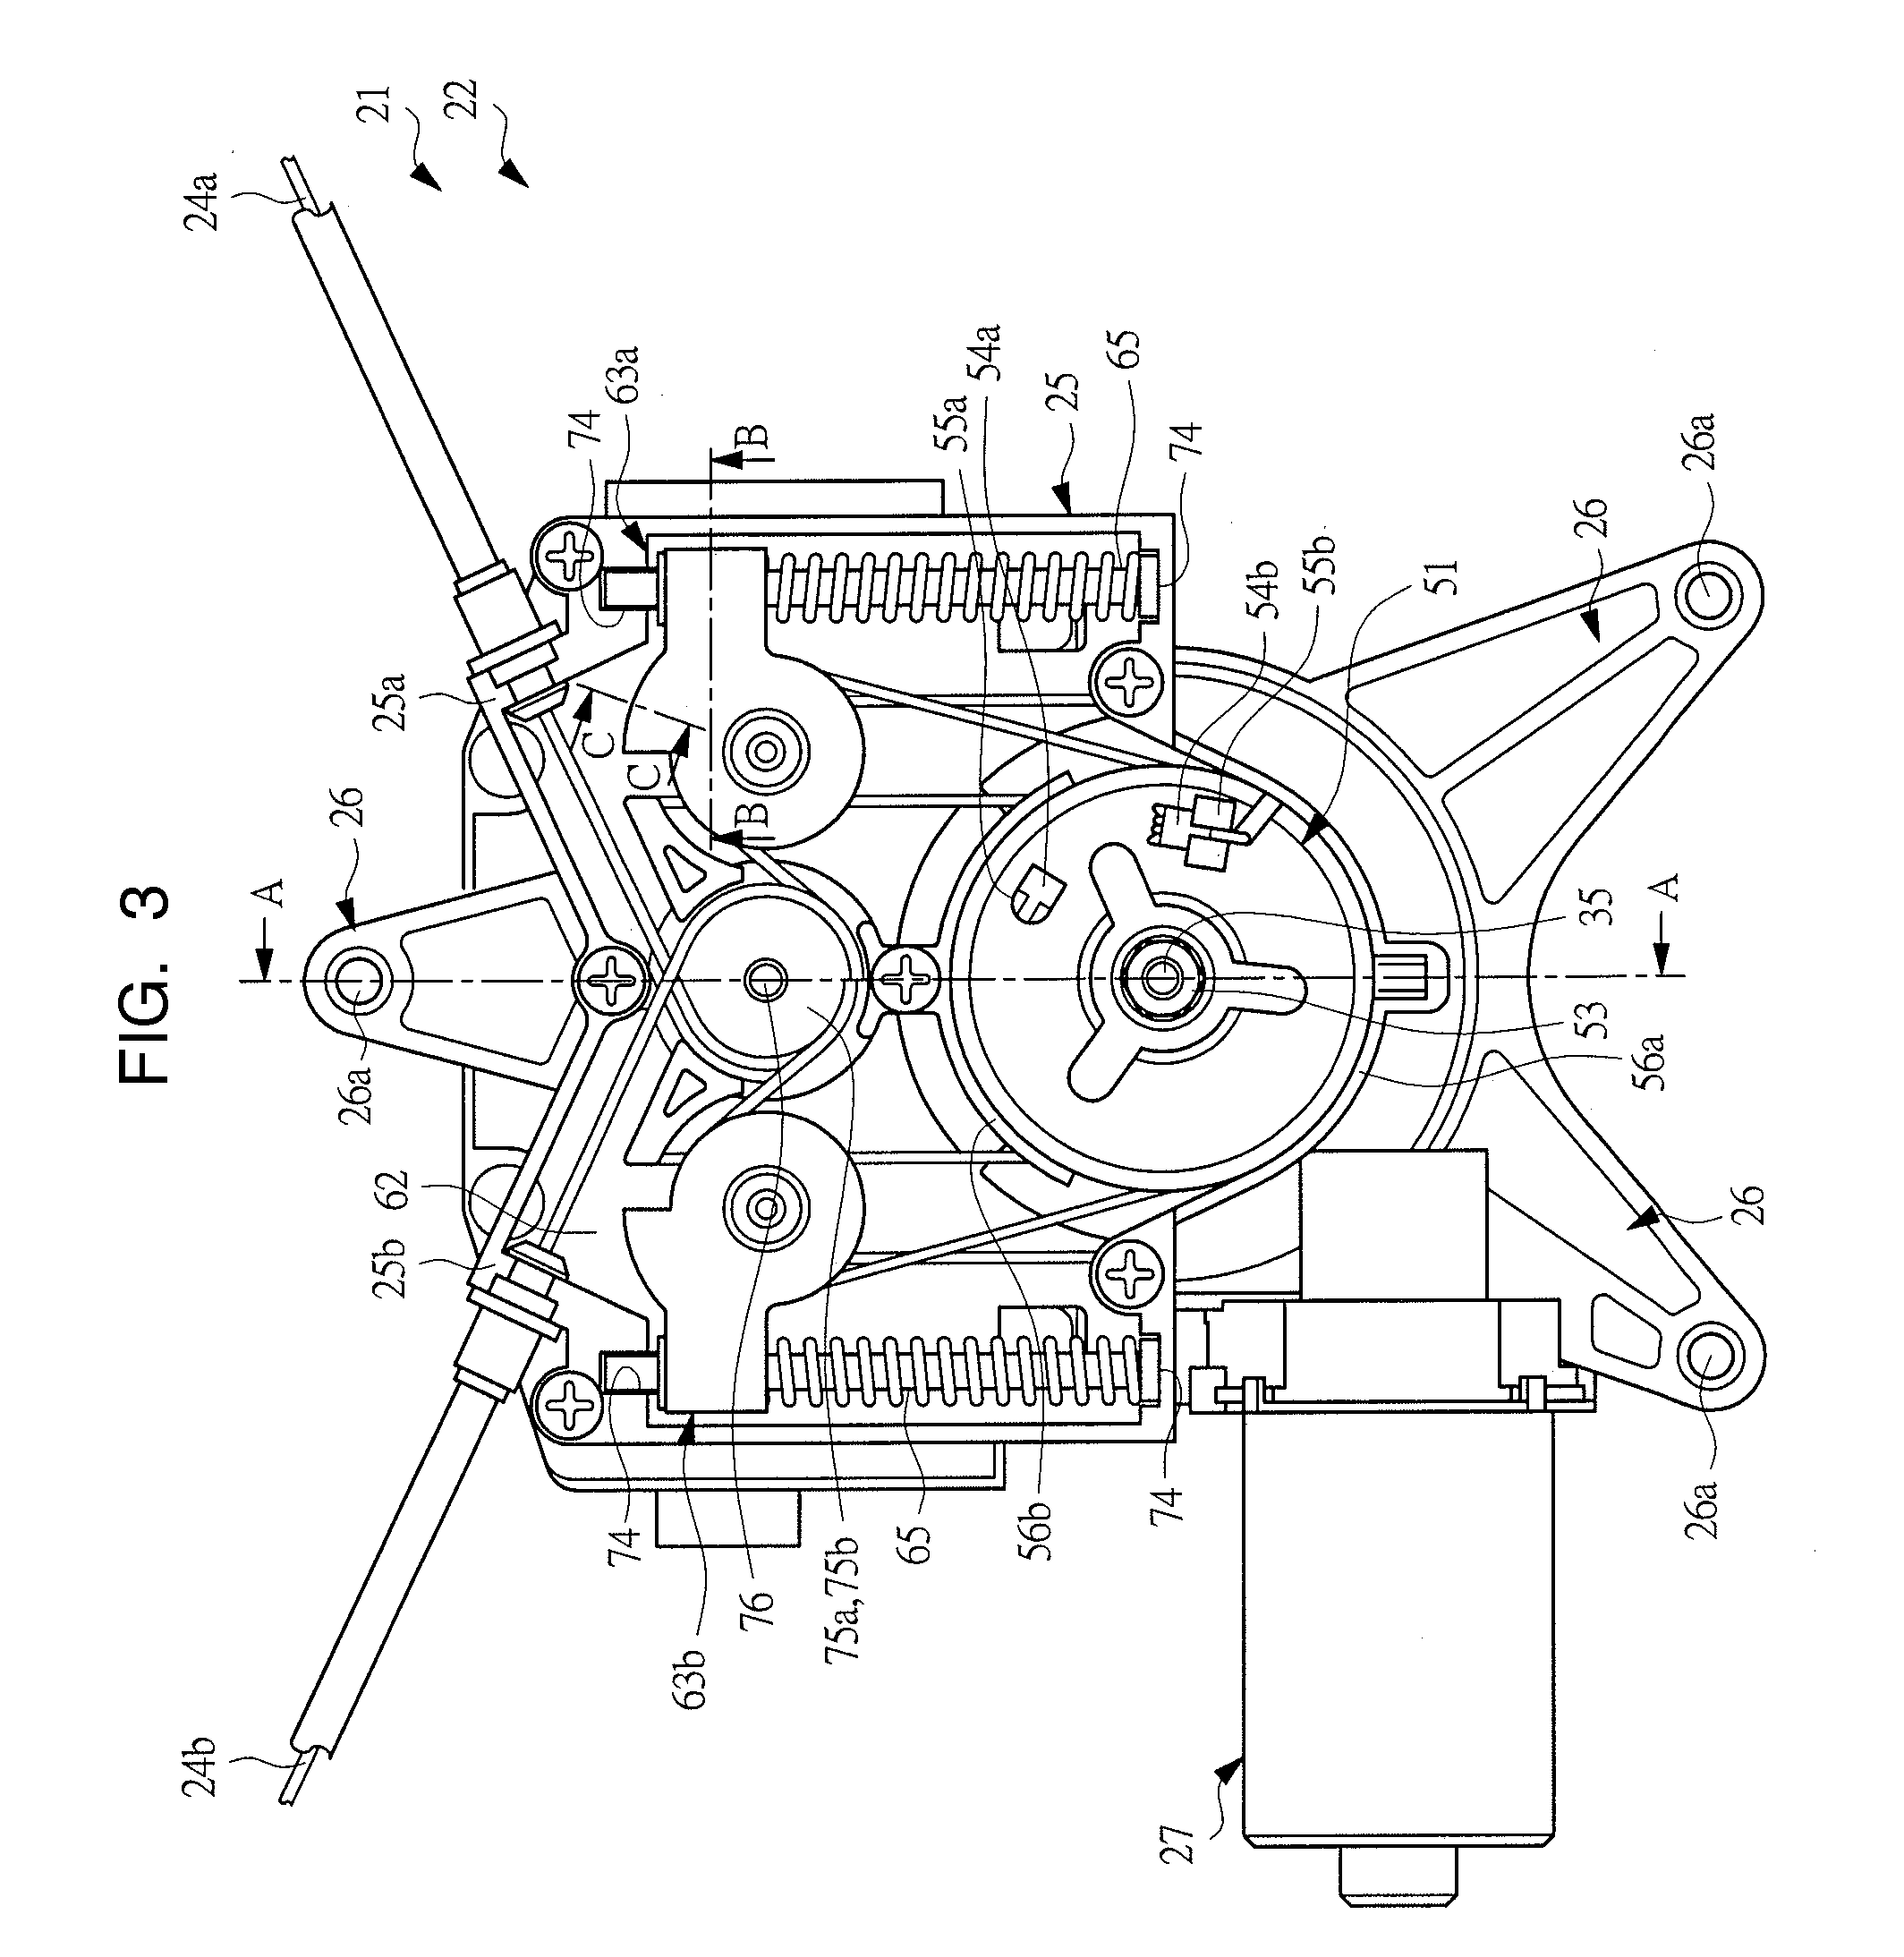 Automatic opening/closing apparatus for vehicle